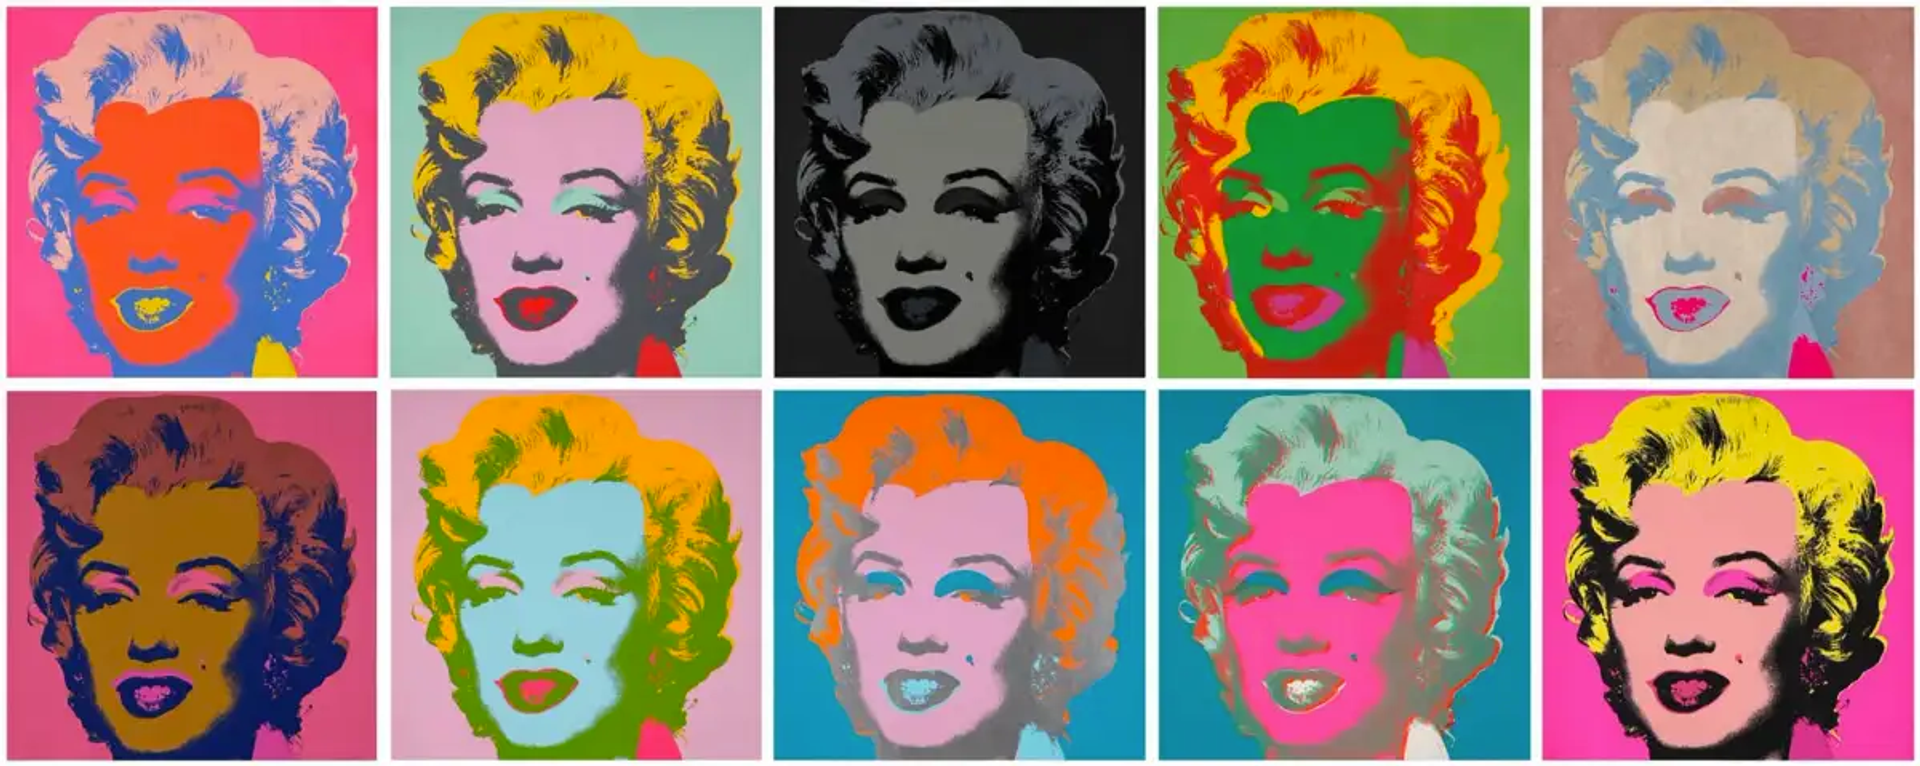 Andy Warhol’s Marilyn Monroe: The Most Famous Face in Hollywood History?